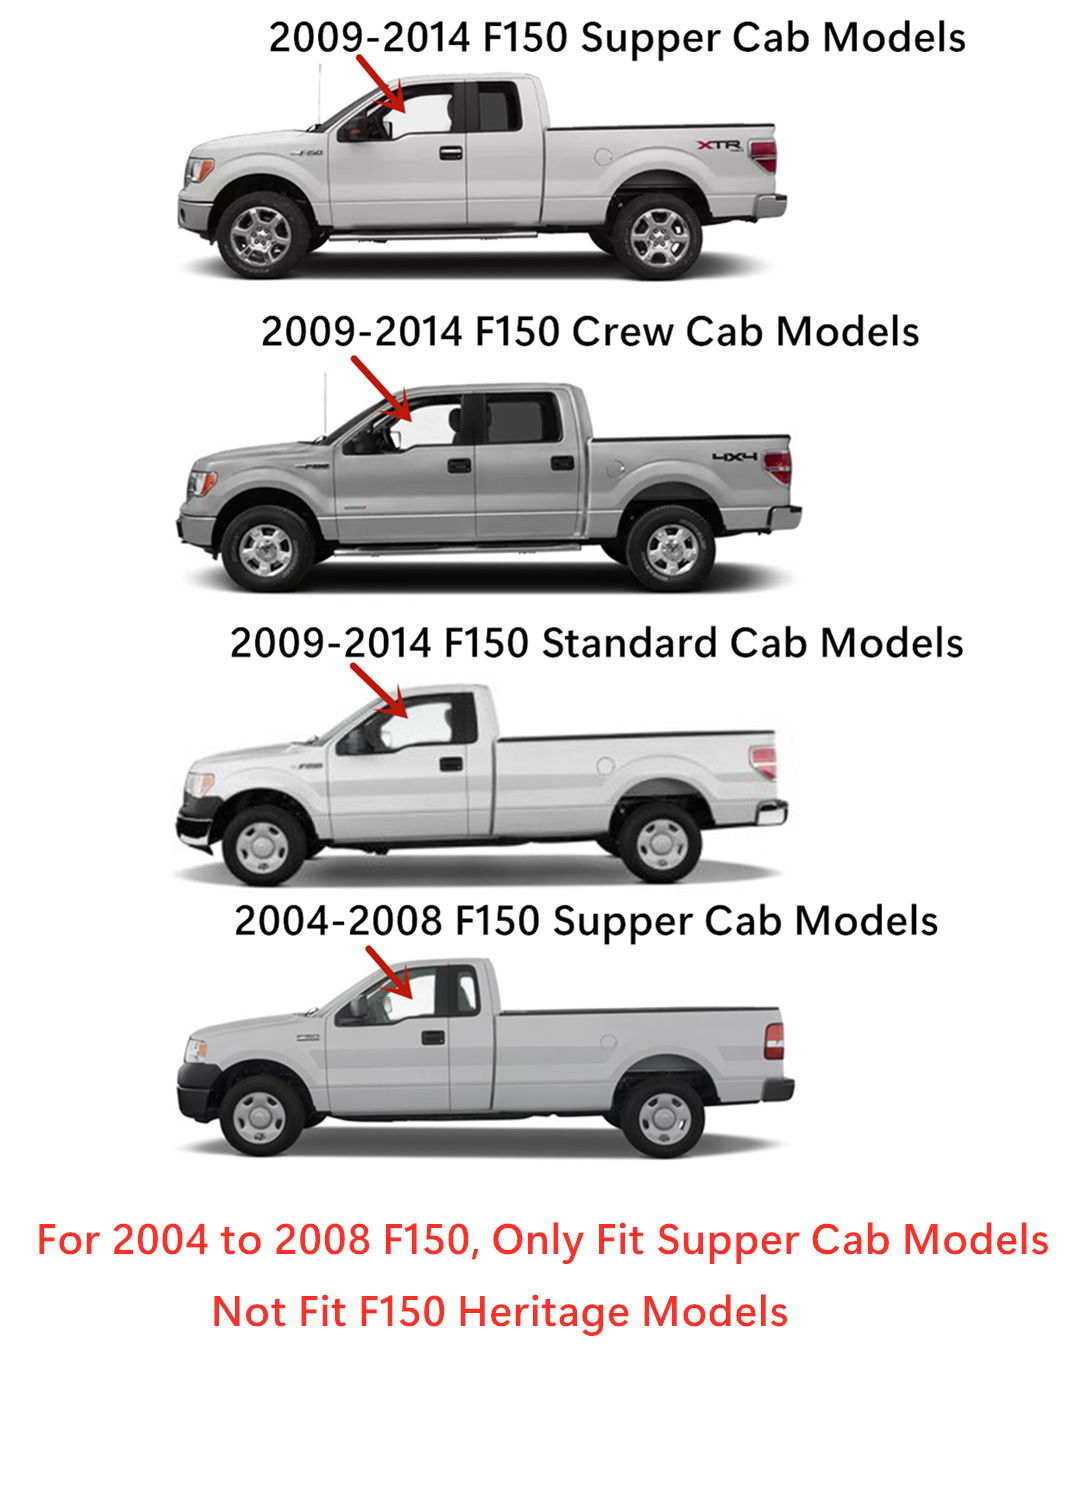 Driver Left Side Front Door Window Door Glass Compatible with Ford F150 2009-2014 All Modes / F150 2004-2008 Super Cab Models Only (Not For F150 Heritage) - image 2 of 2